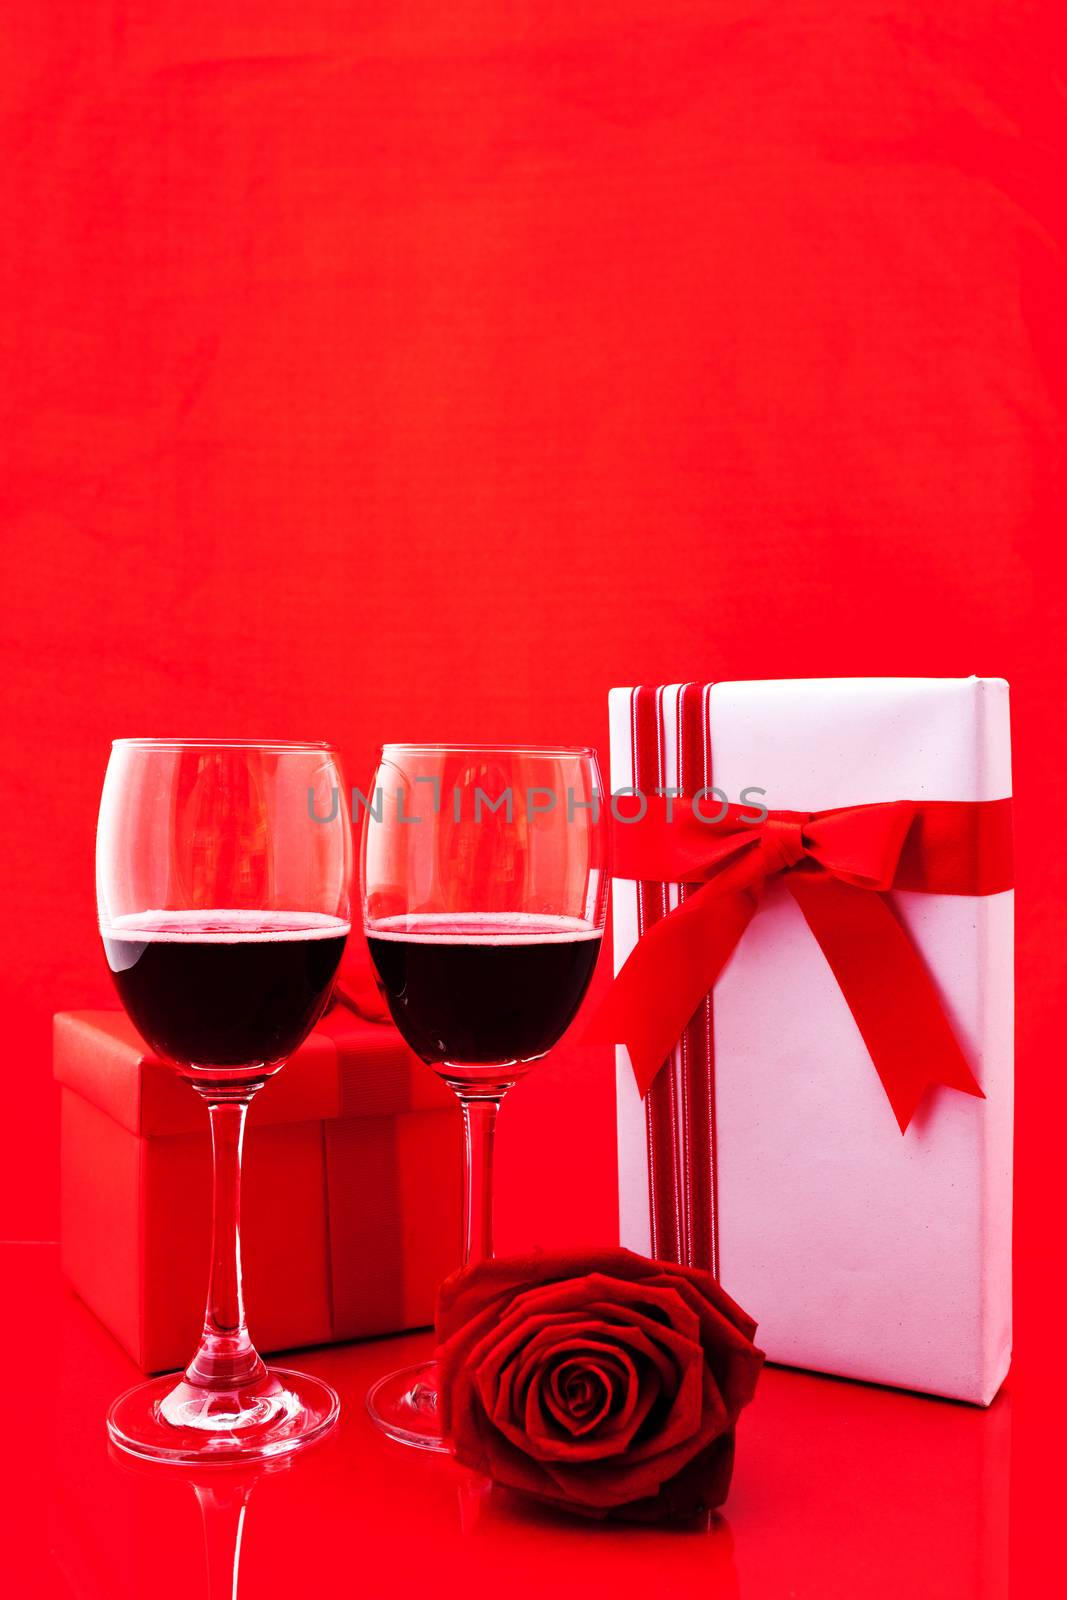 St Valentine's setting with present and red wine.